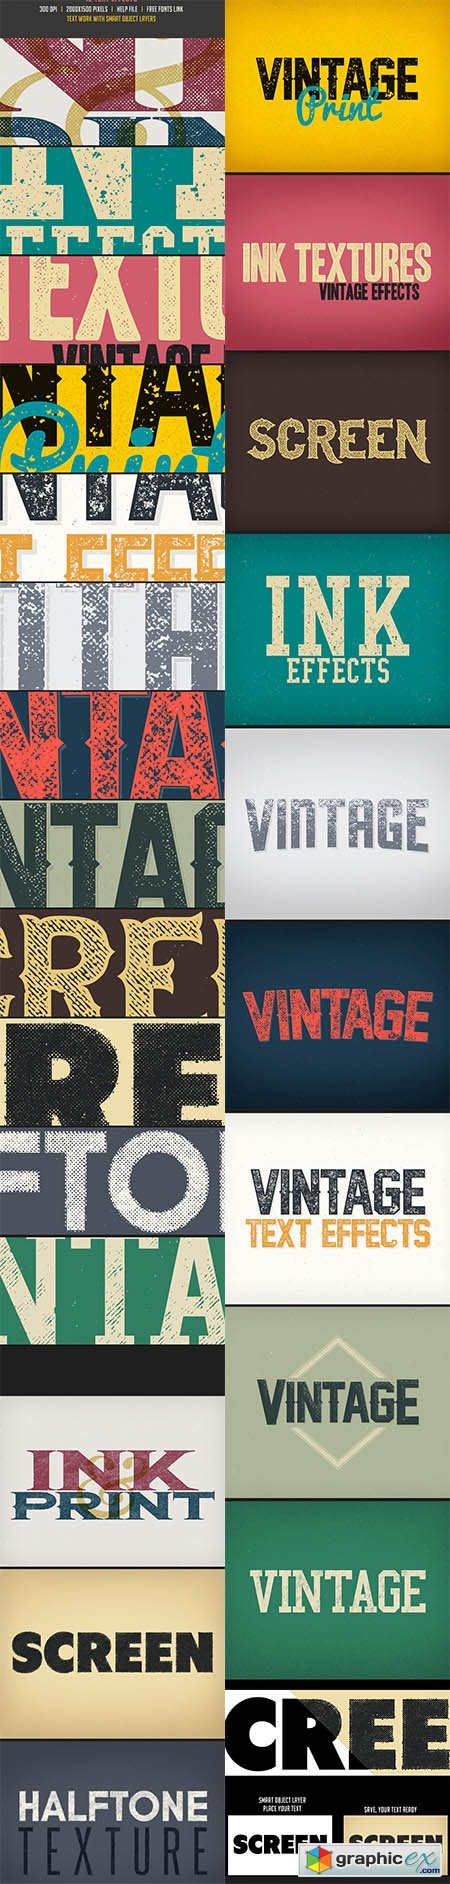 Letter/Ink Press Vintage Text Effects 4